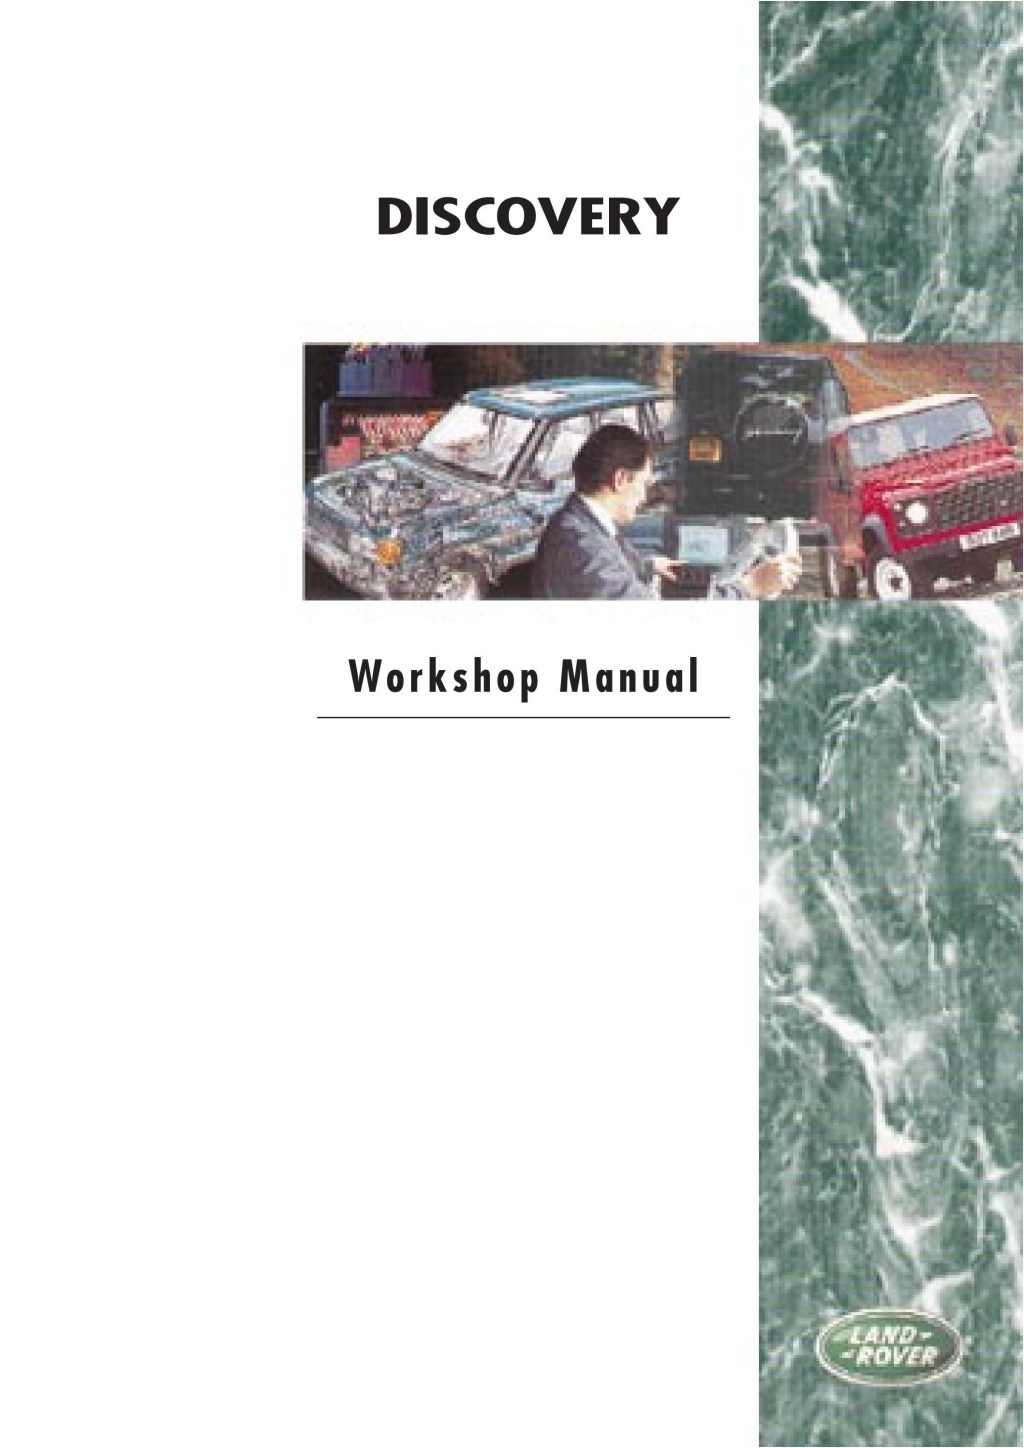 Picture of: Land Rover Discovery  Service Repair Manual by kmidisodkbmv